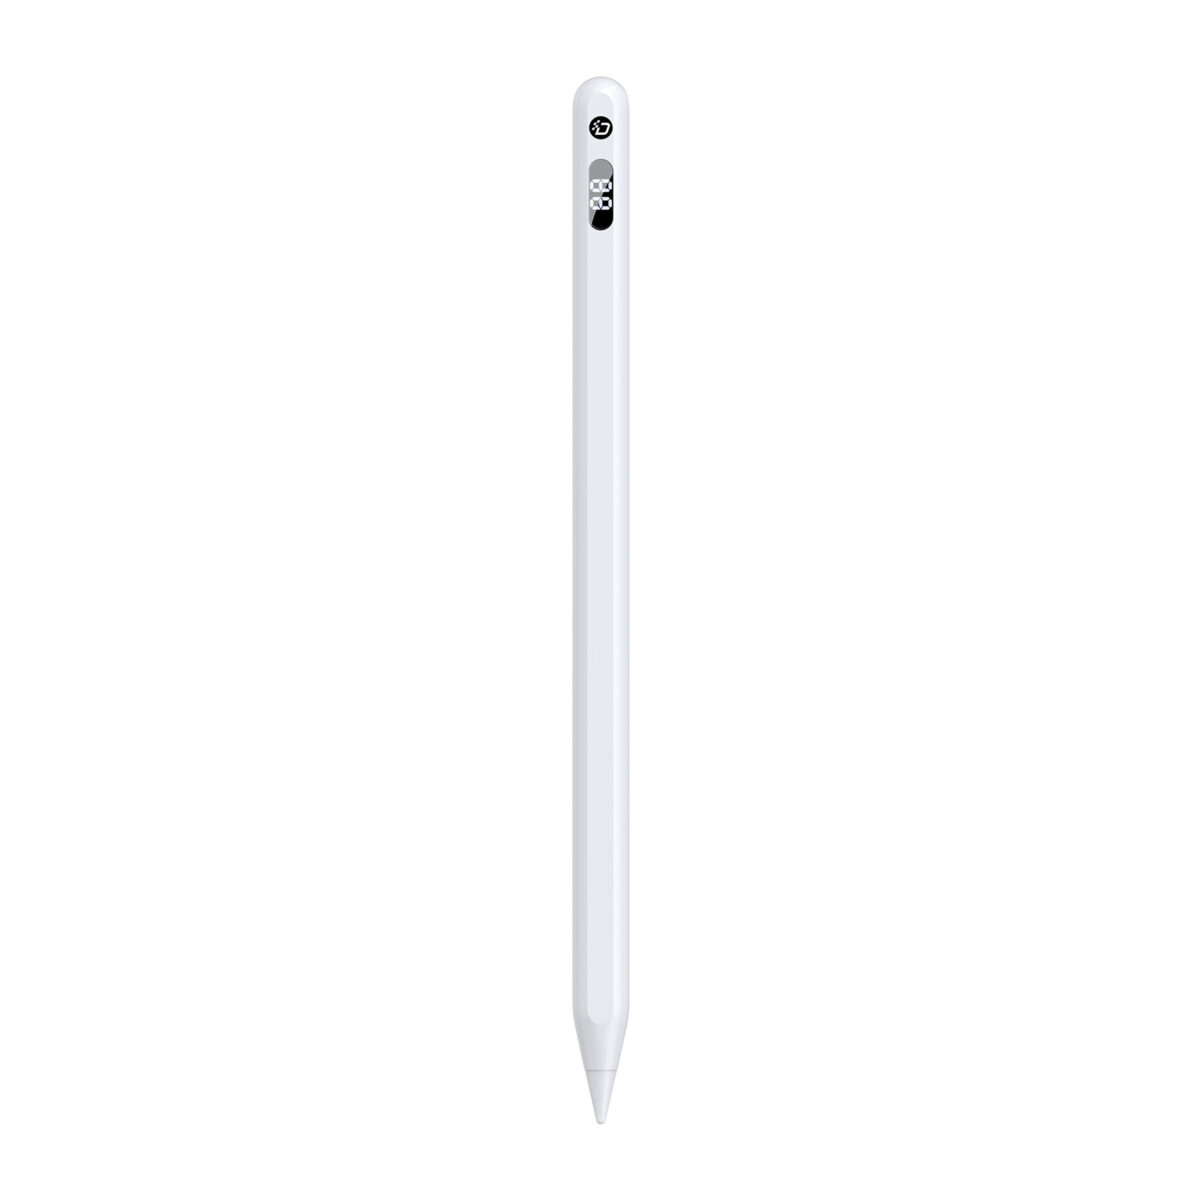 SP-05 White Stylus Pen with Wireless Charging and Power Display